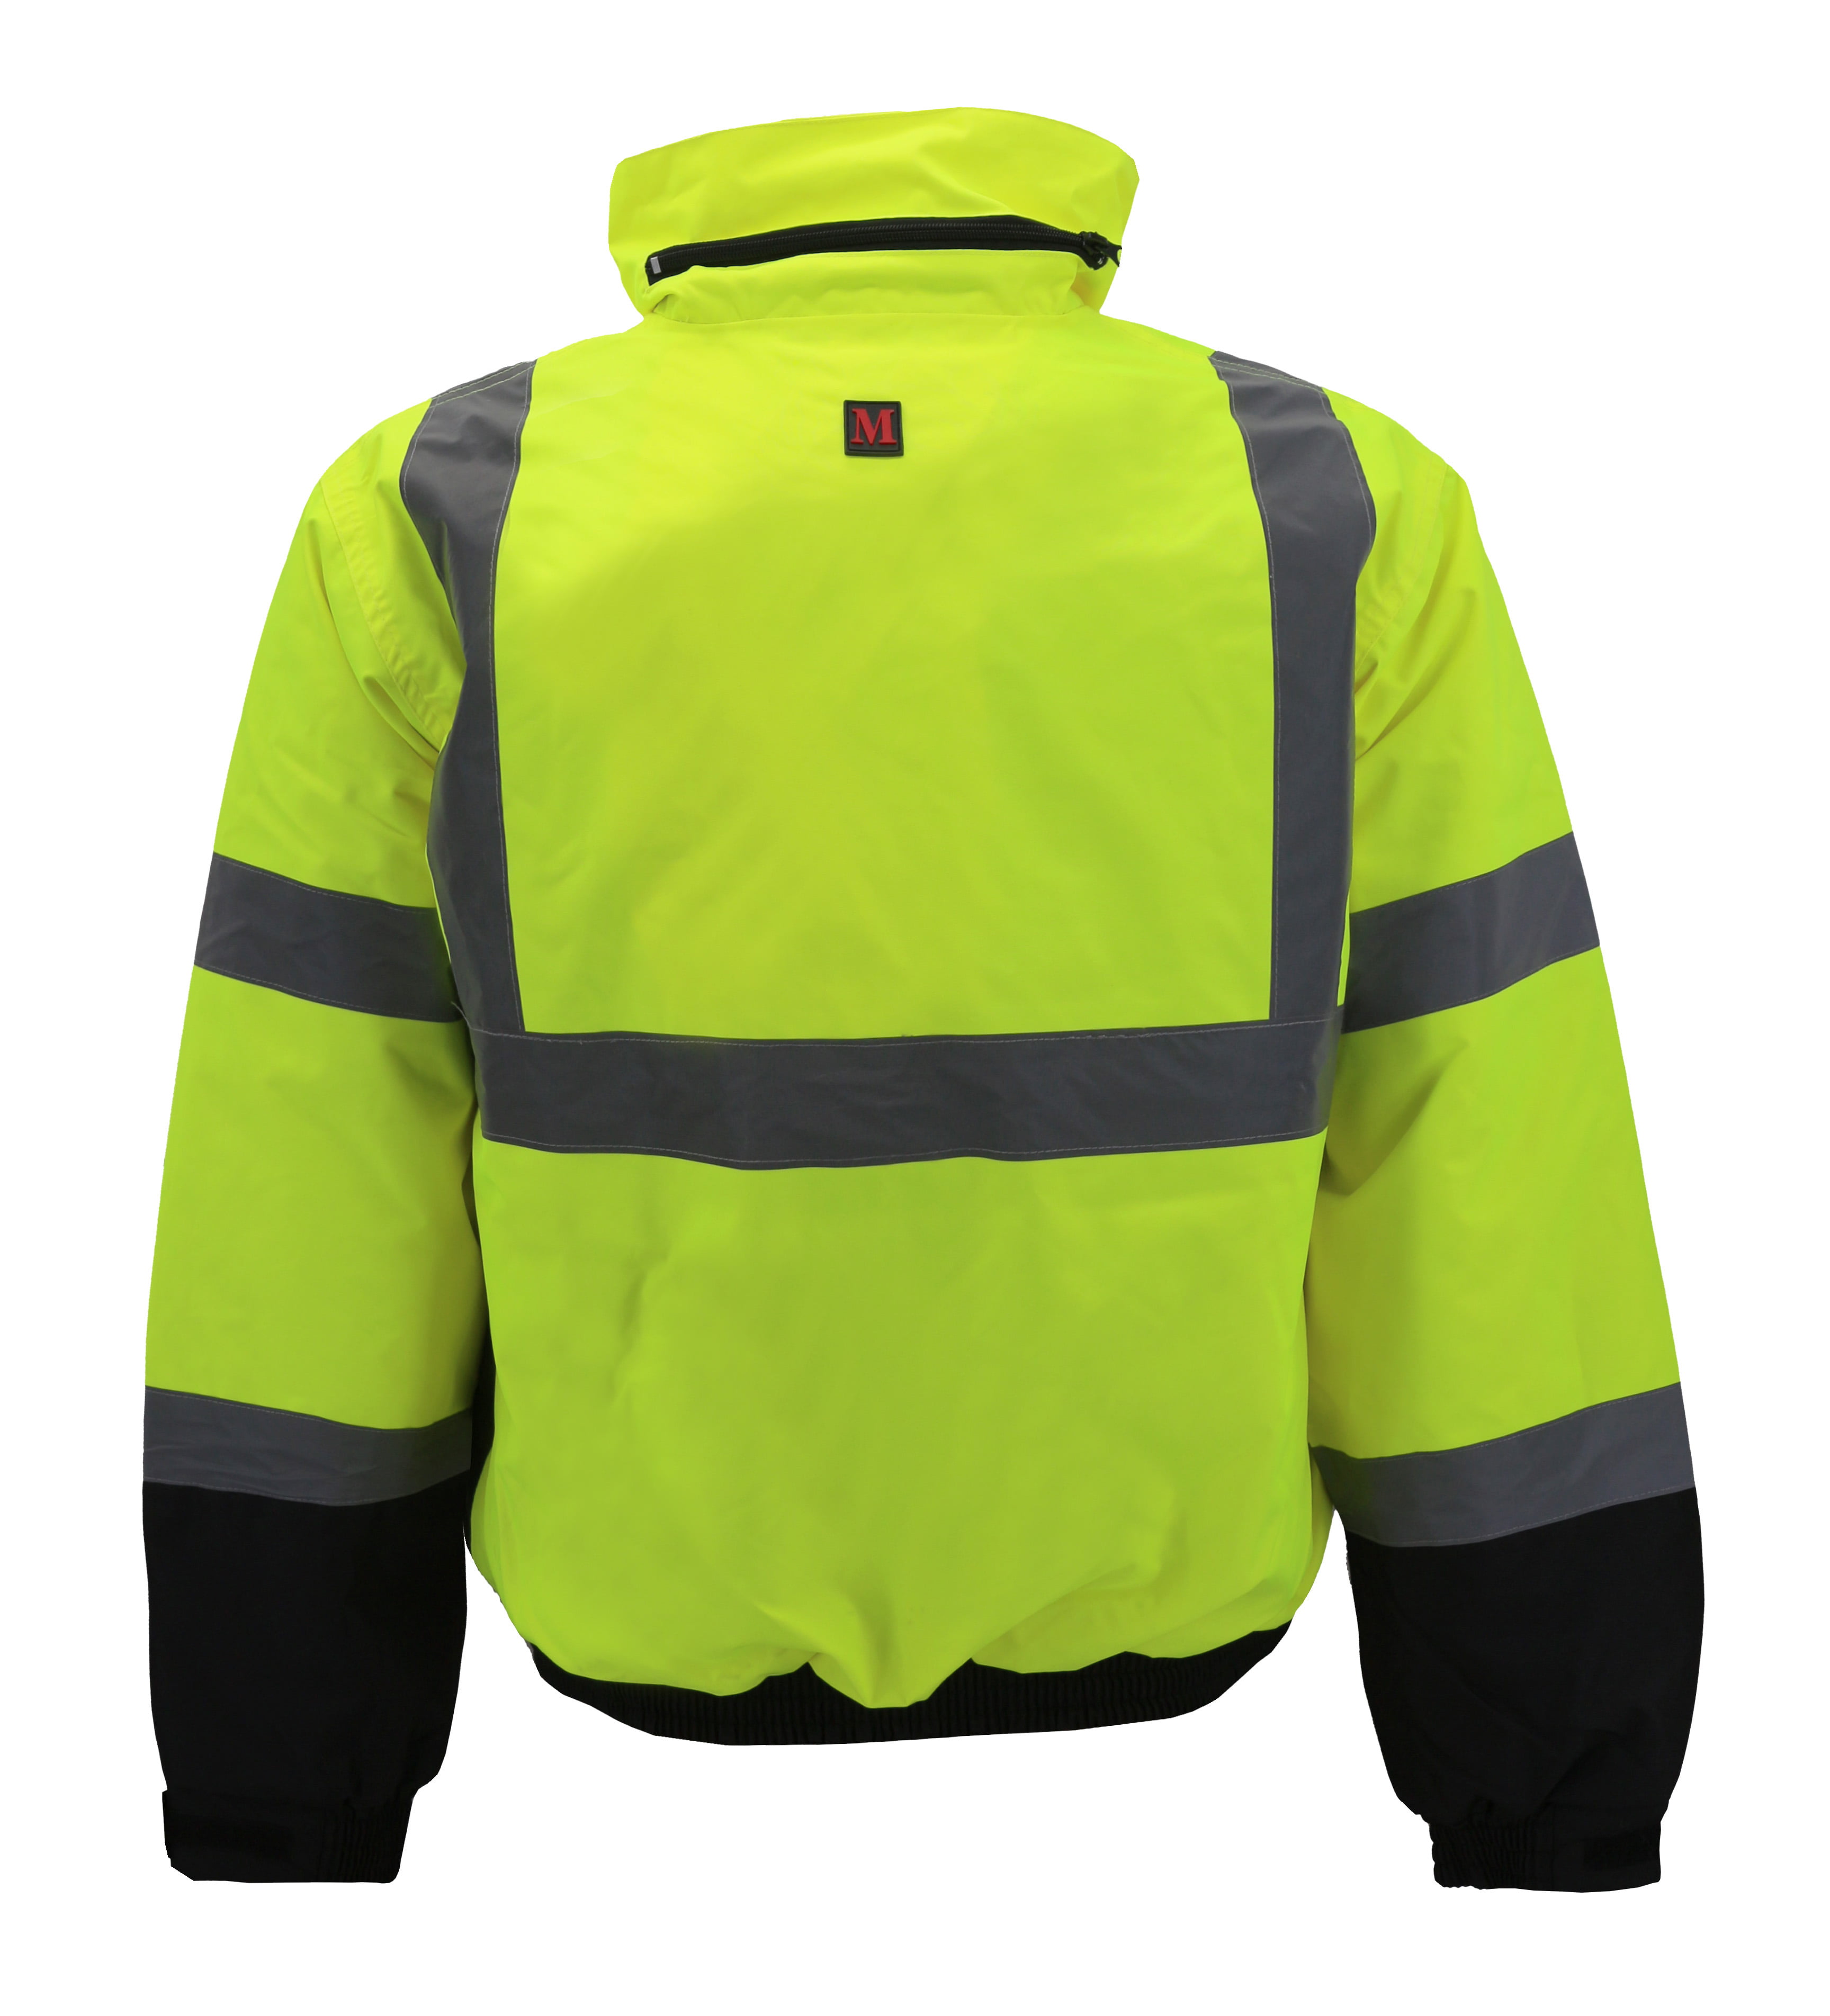  sesafety Reflective Jacket for Men, High Visibility Jackets for  Men, Safety Jackets for Men, Hi Vis Construction Bomber Jackets Waterproof  with Pockets and Zipper, Black Bottom, Class 3, Yellow, 5XL 